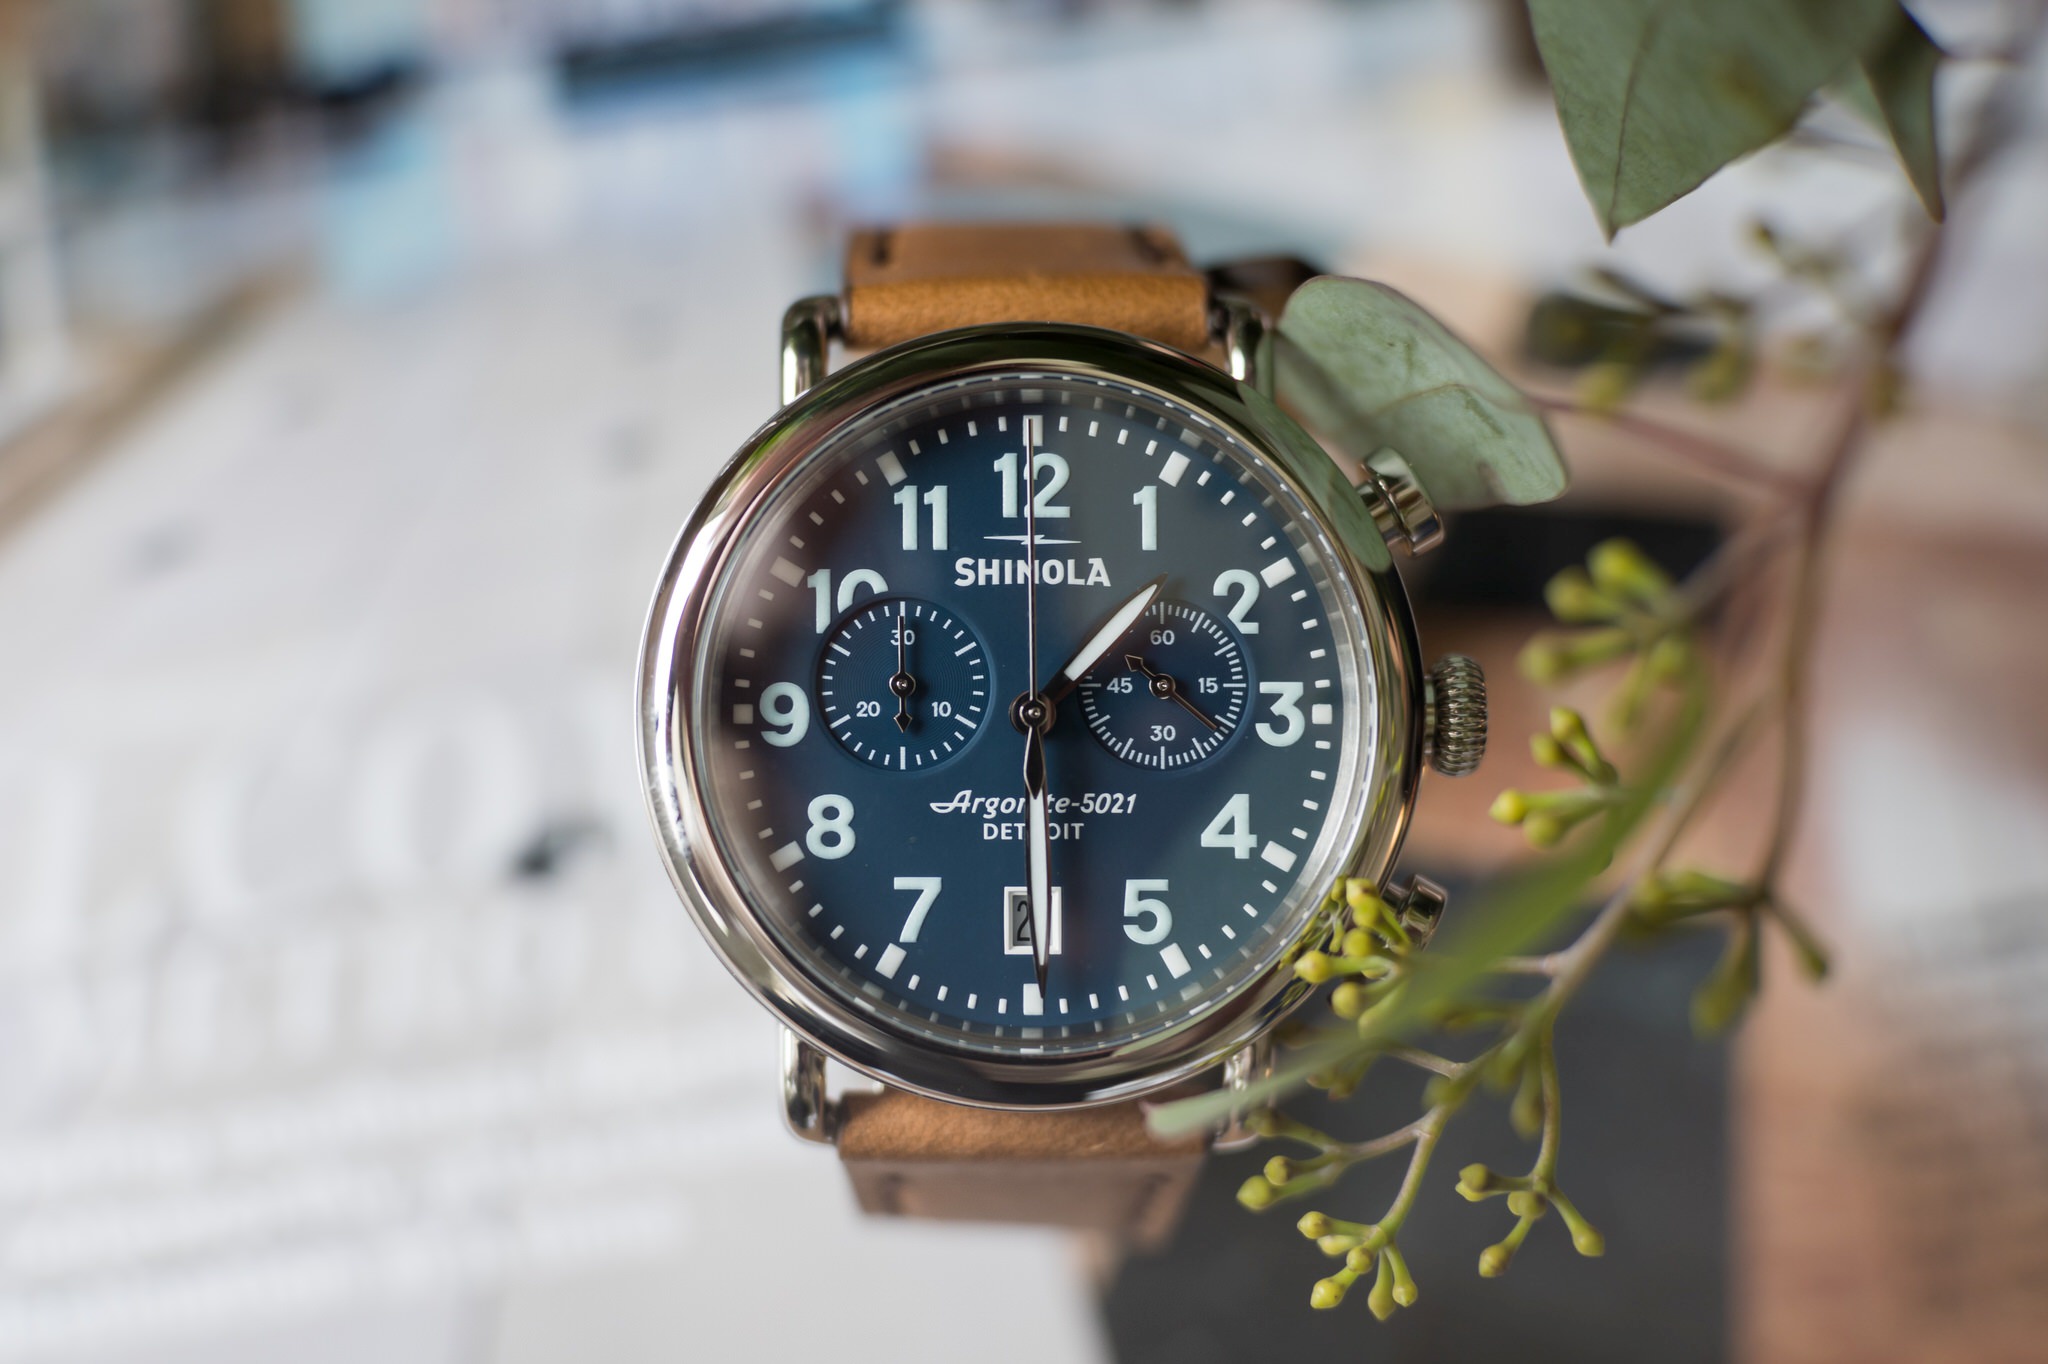 Shinola watch with blue face